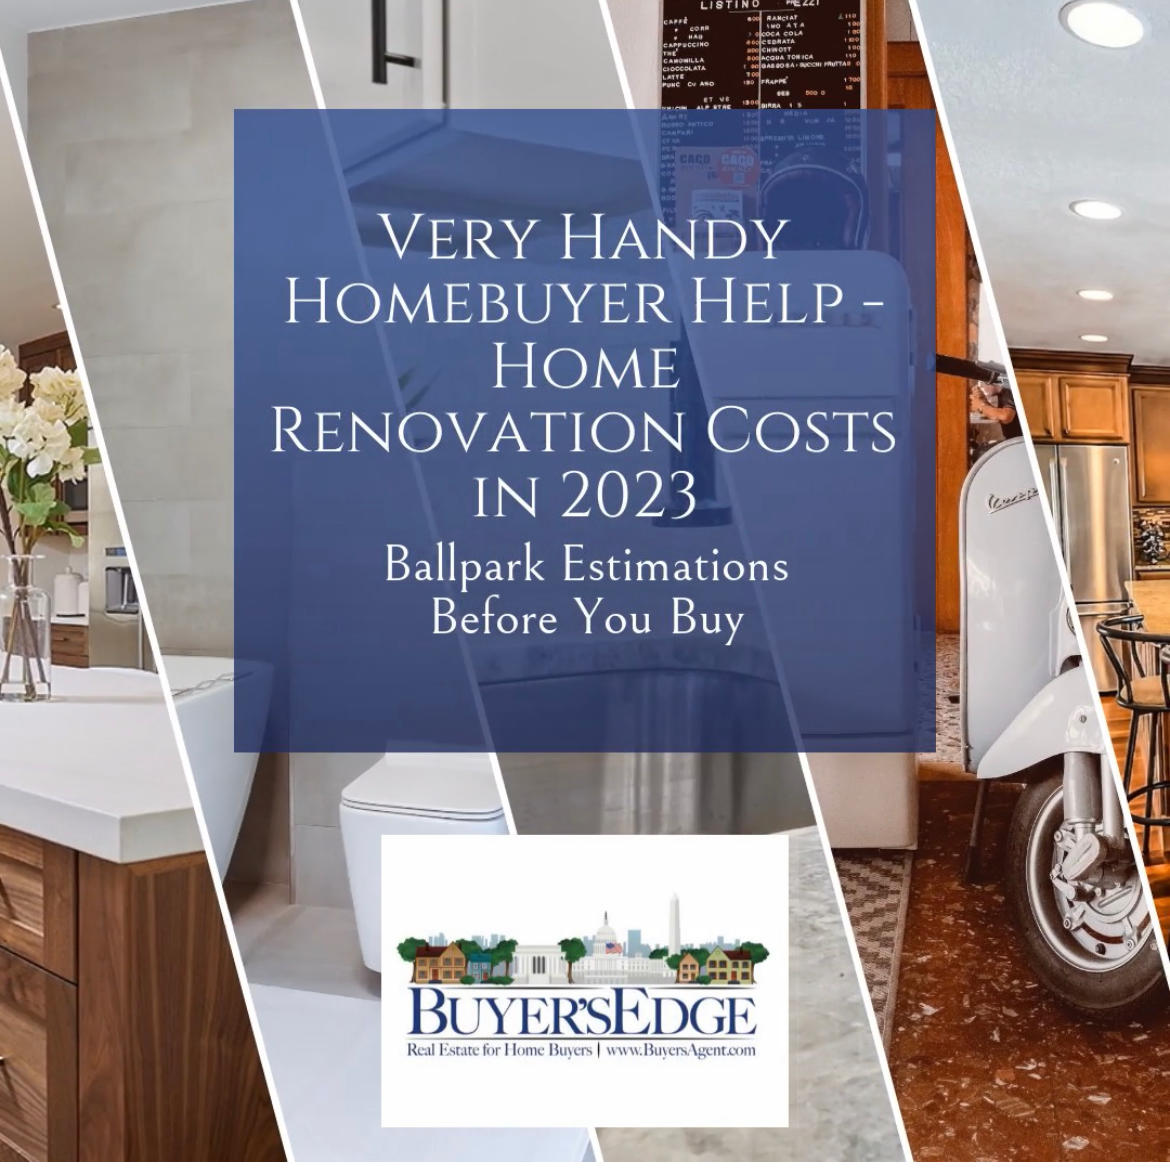 Very Handy Homebuyer Help - Home Renovation Costs in 2023 - Ballpark Estimations Before You Buy